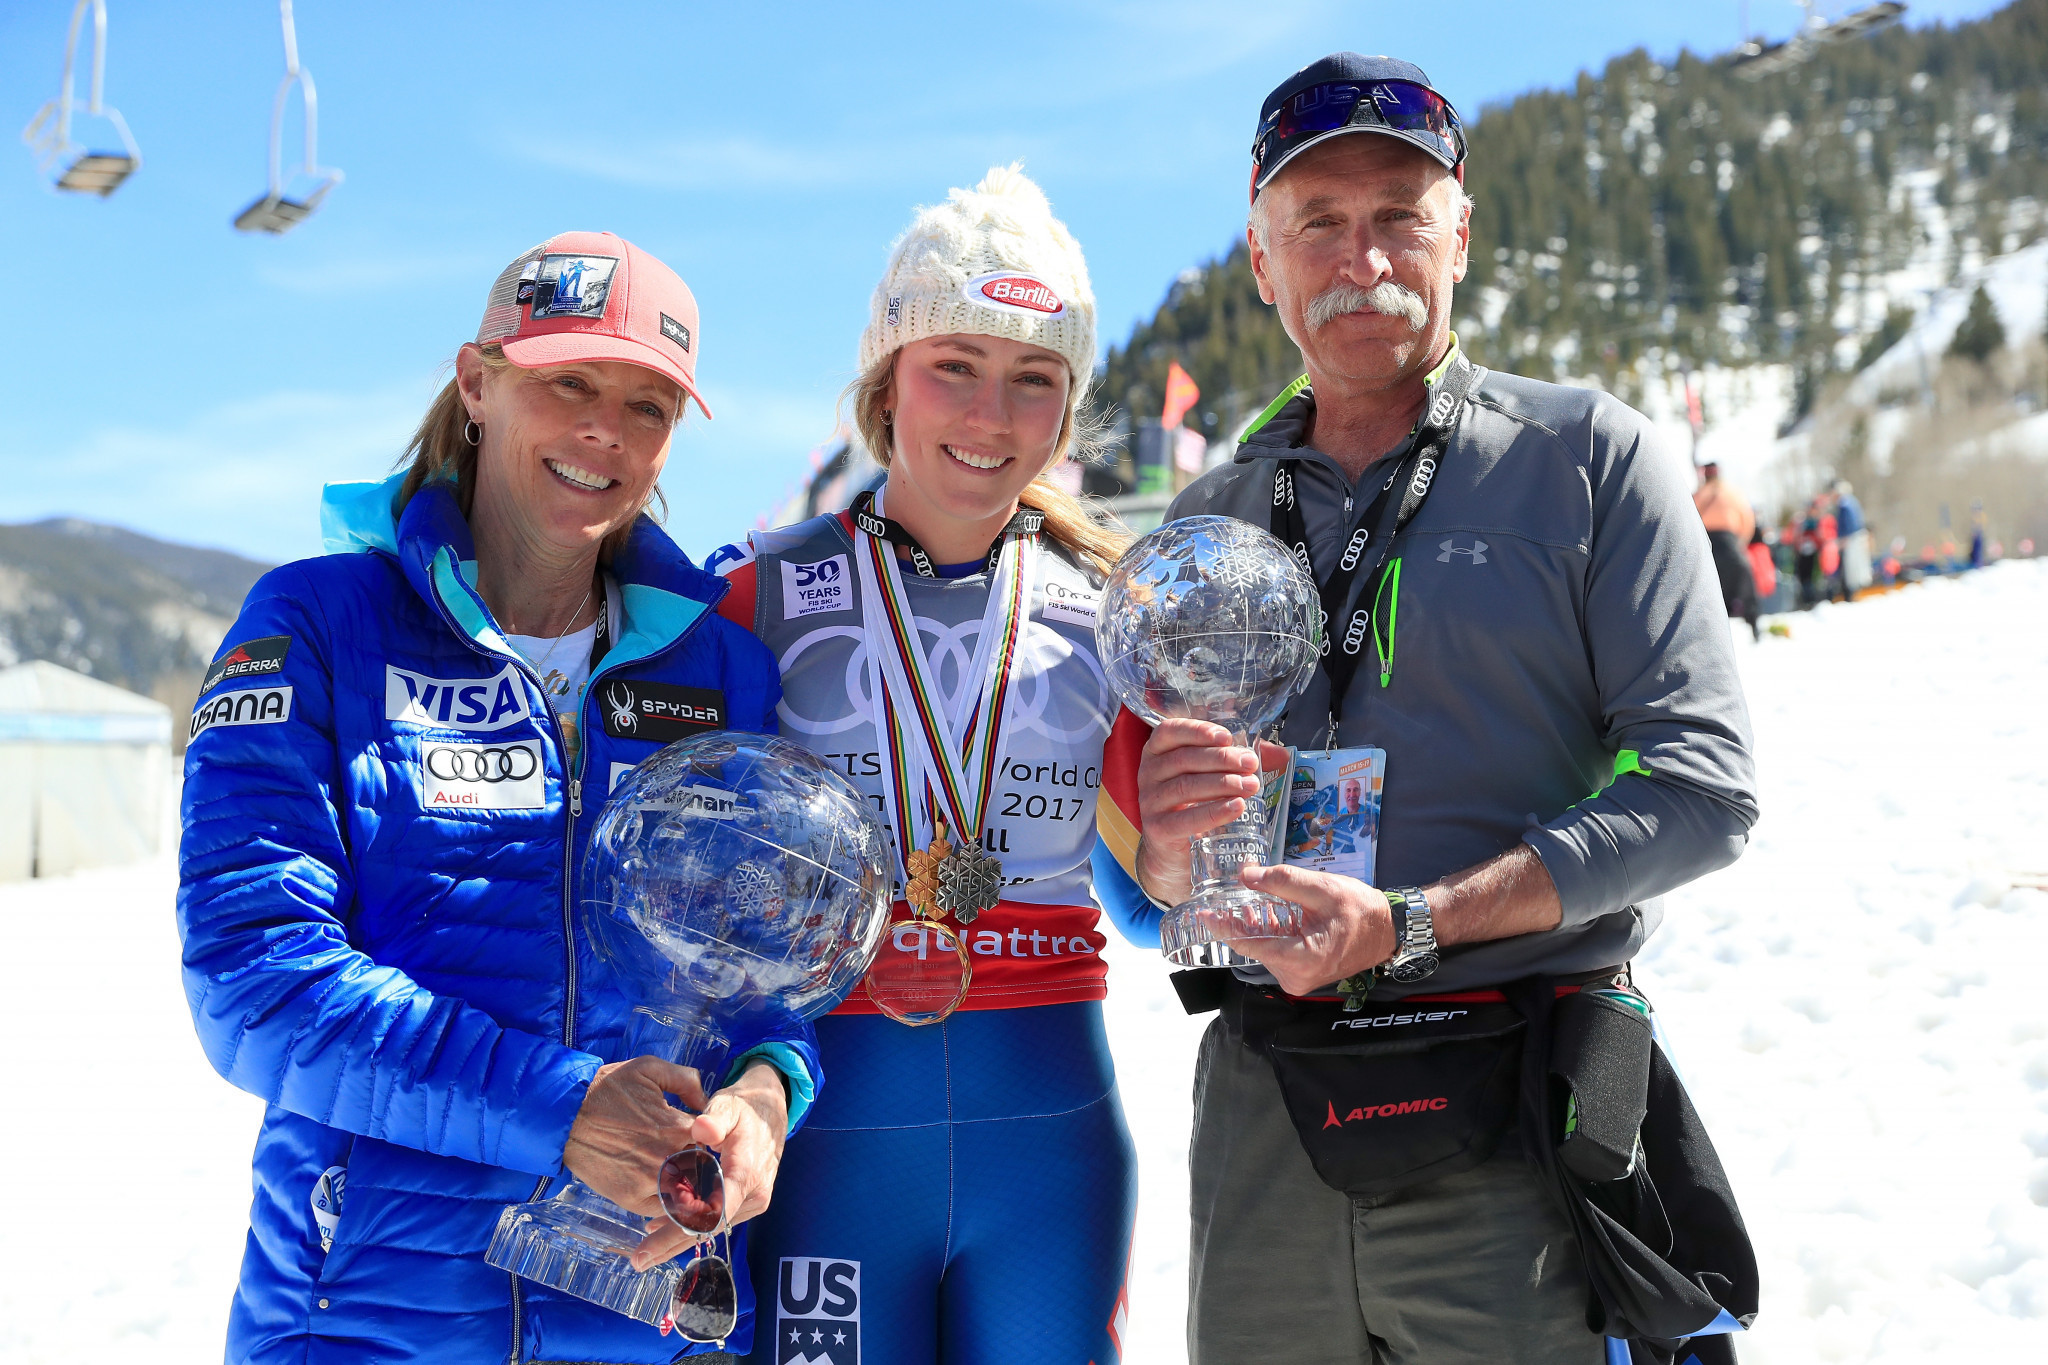 US Ski and Snowboard athletes receive $1,300 payments from Jeff Shiffrin Athlete Resiliency Fund